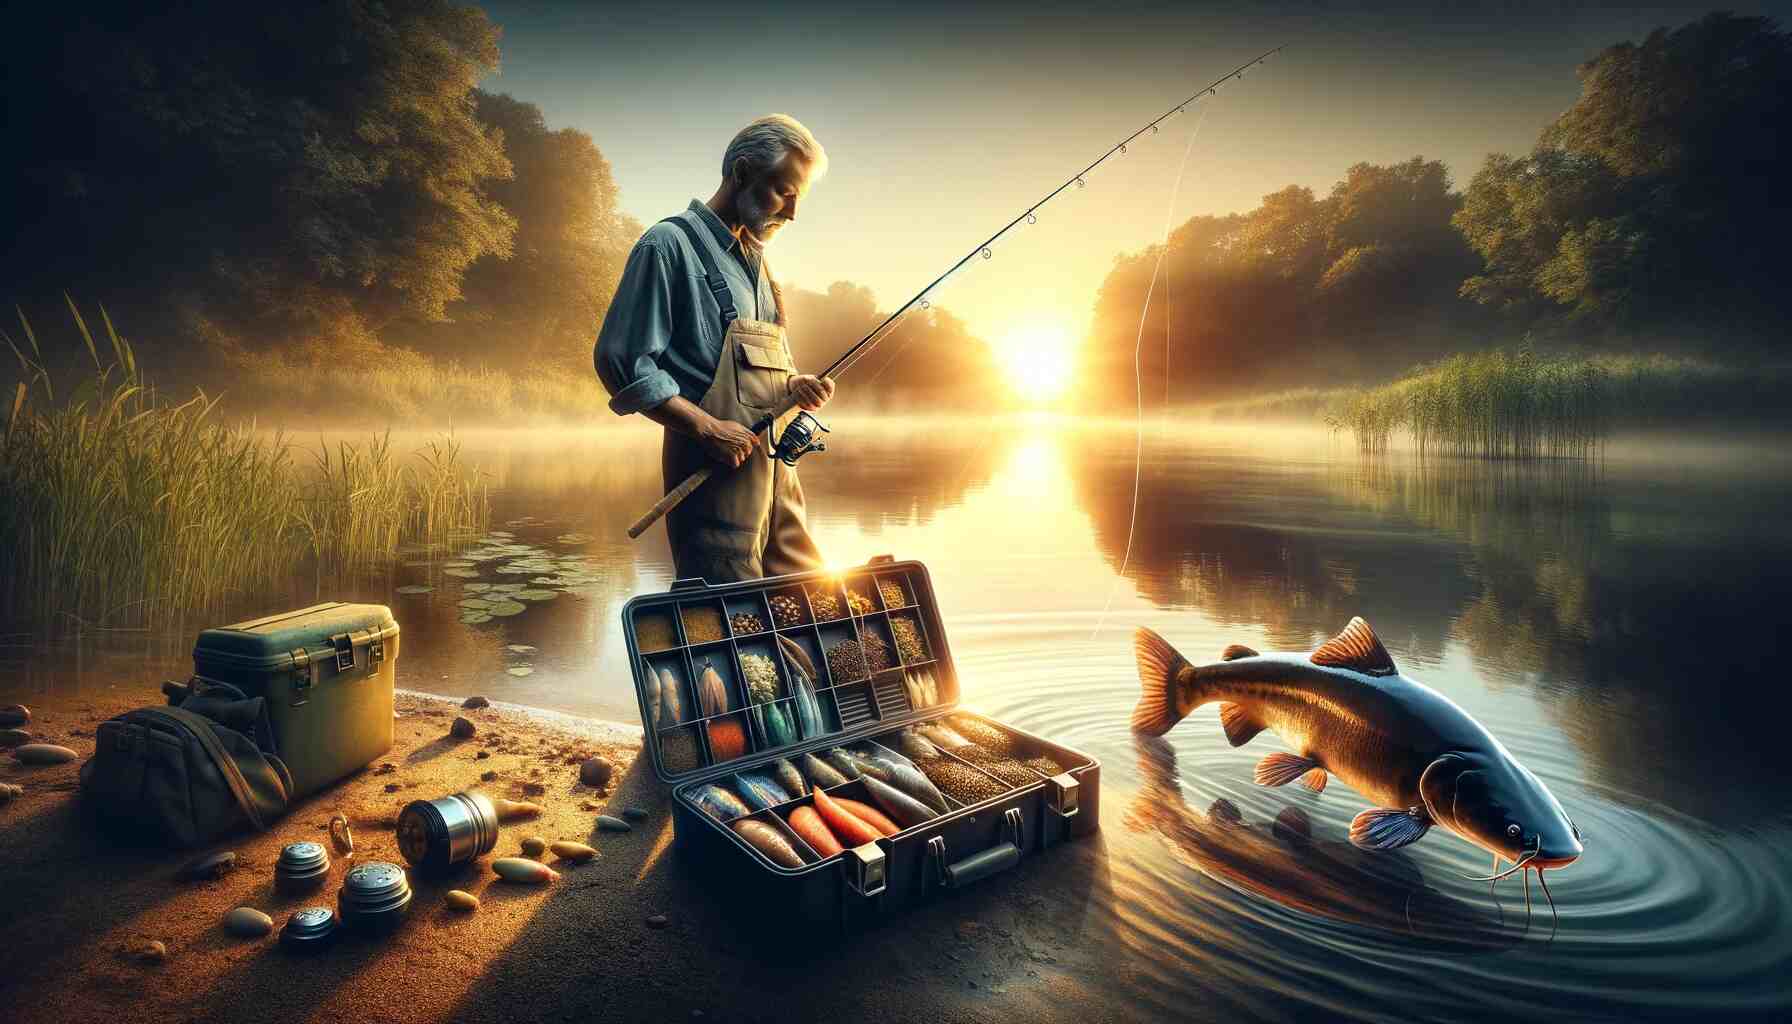 A seasoned angler stands on a quiet river bank at sunrise, selecting fishing bait for catfish from a tackle box, with the silhouette of a large catfish visible just below the water's surface, encapsulating the anticipation and strategy of catfish fishing.